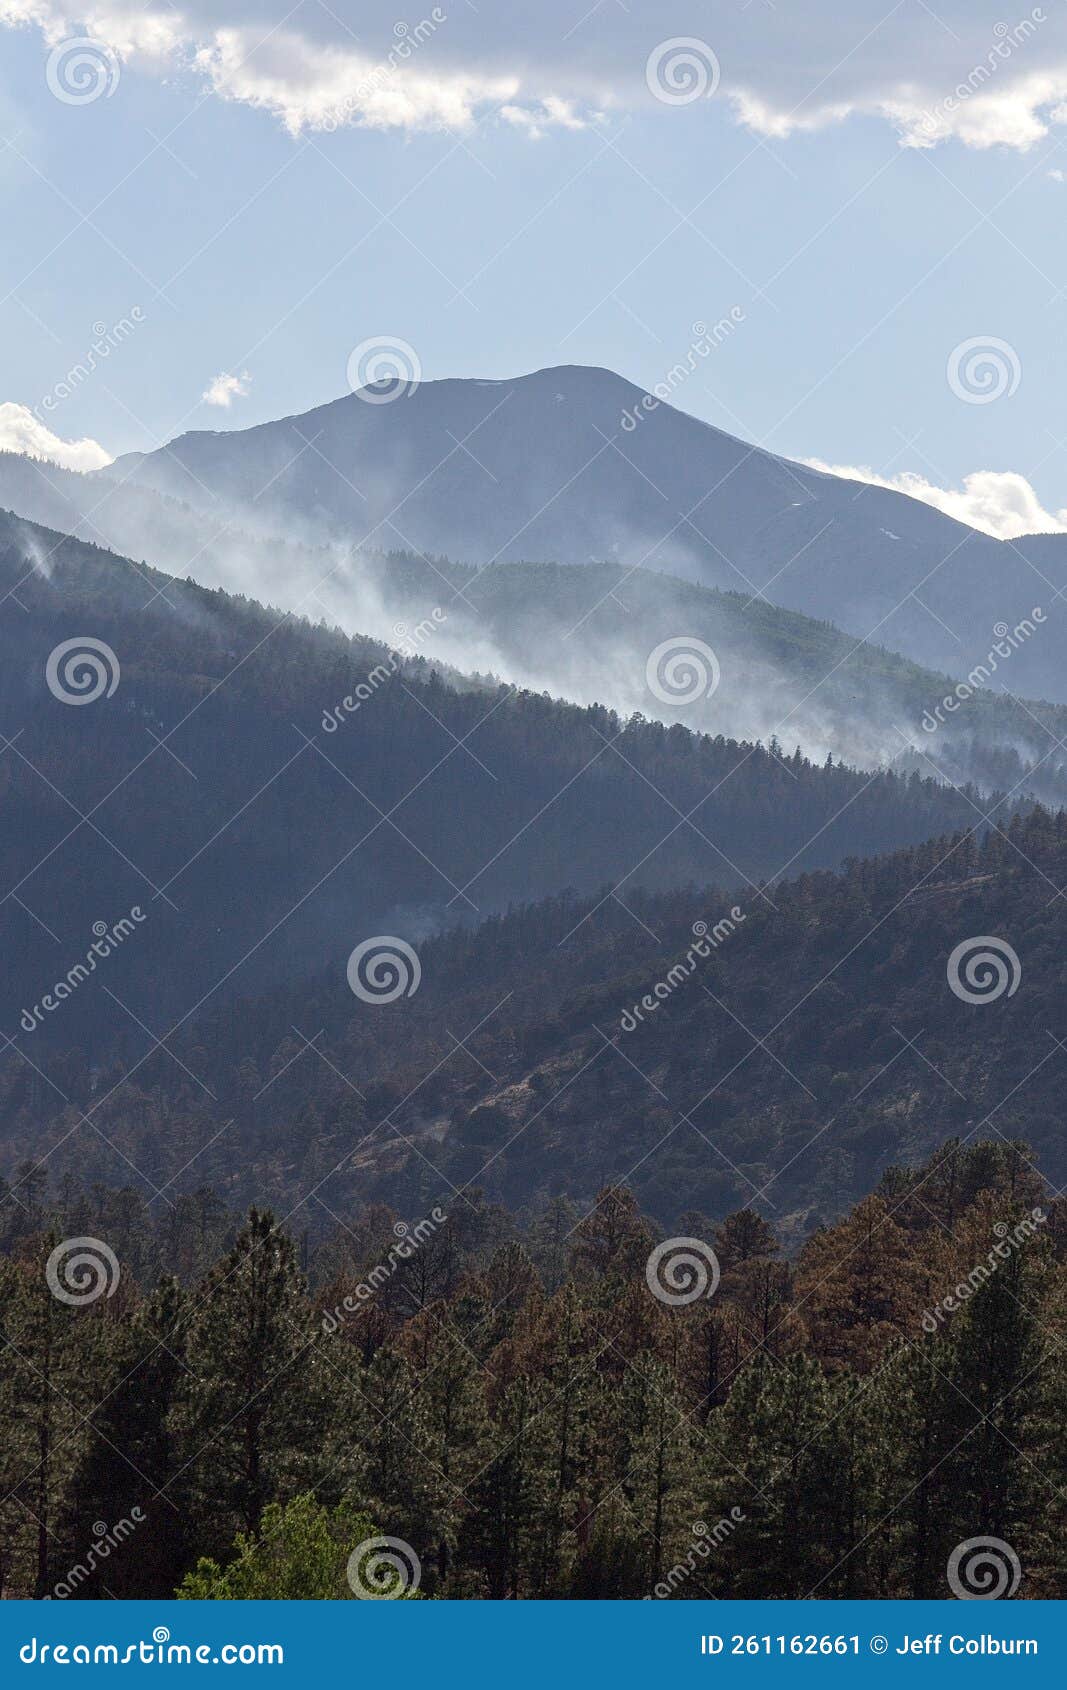 smoke rising from the forest during the schultz fire near flagstaff, arizona.